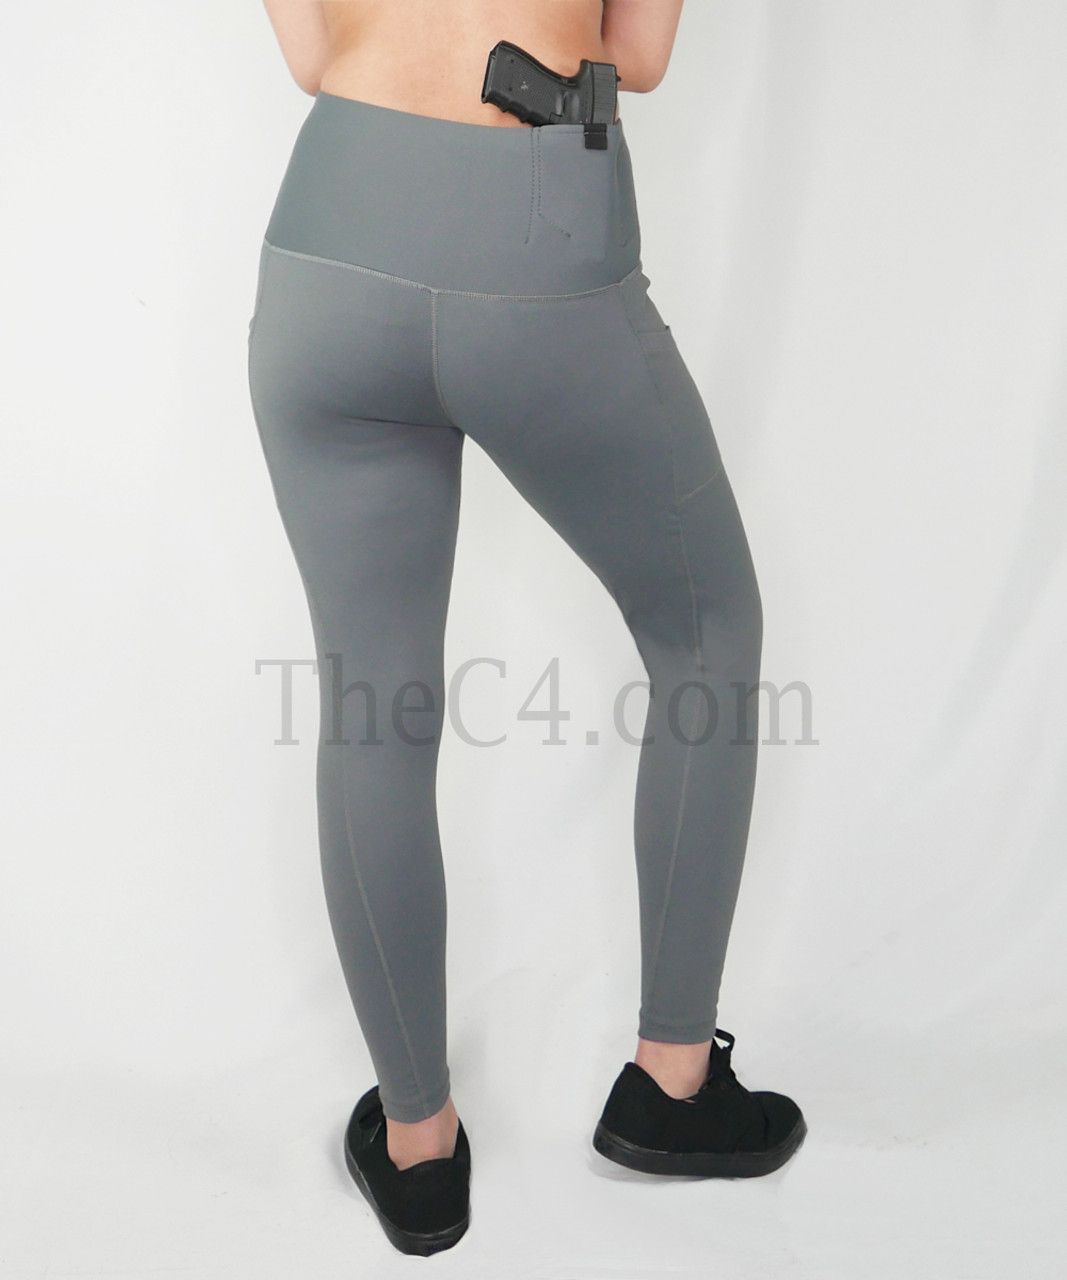 Fit4fia - Concealed Carry ✖️ Leggings If you are wondering how to  efficiently and safely conceal carry in leggings this post is for you✔️  @alexo offers a range of concealed carry leggings